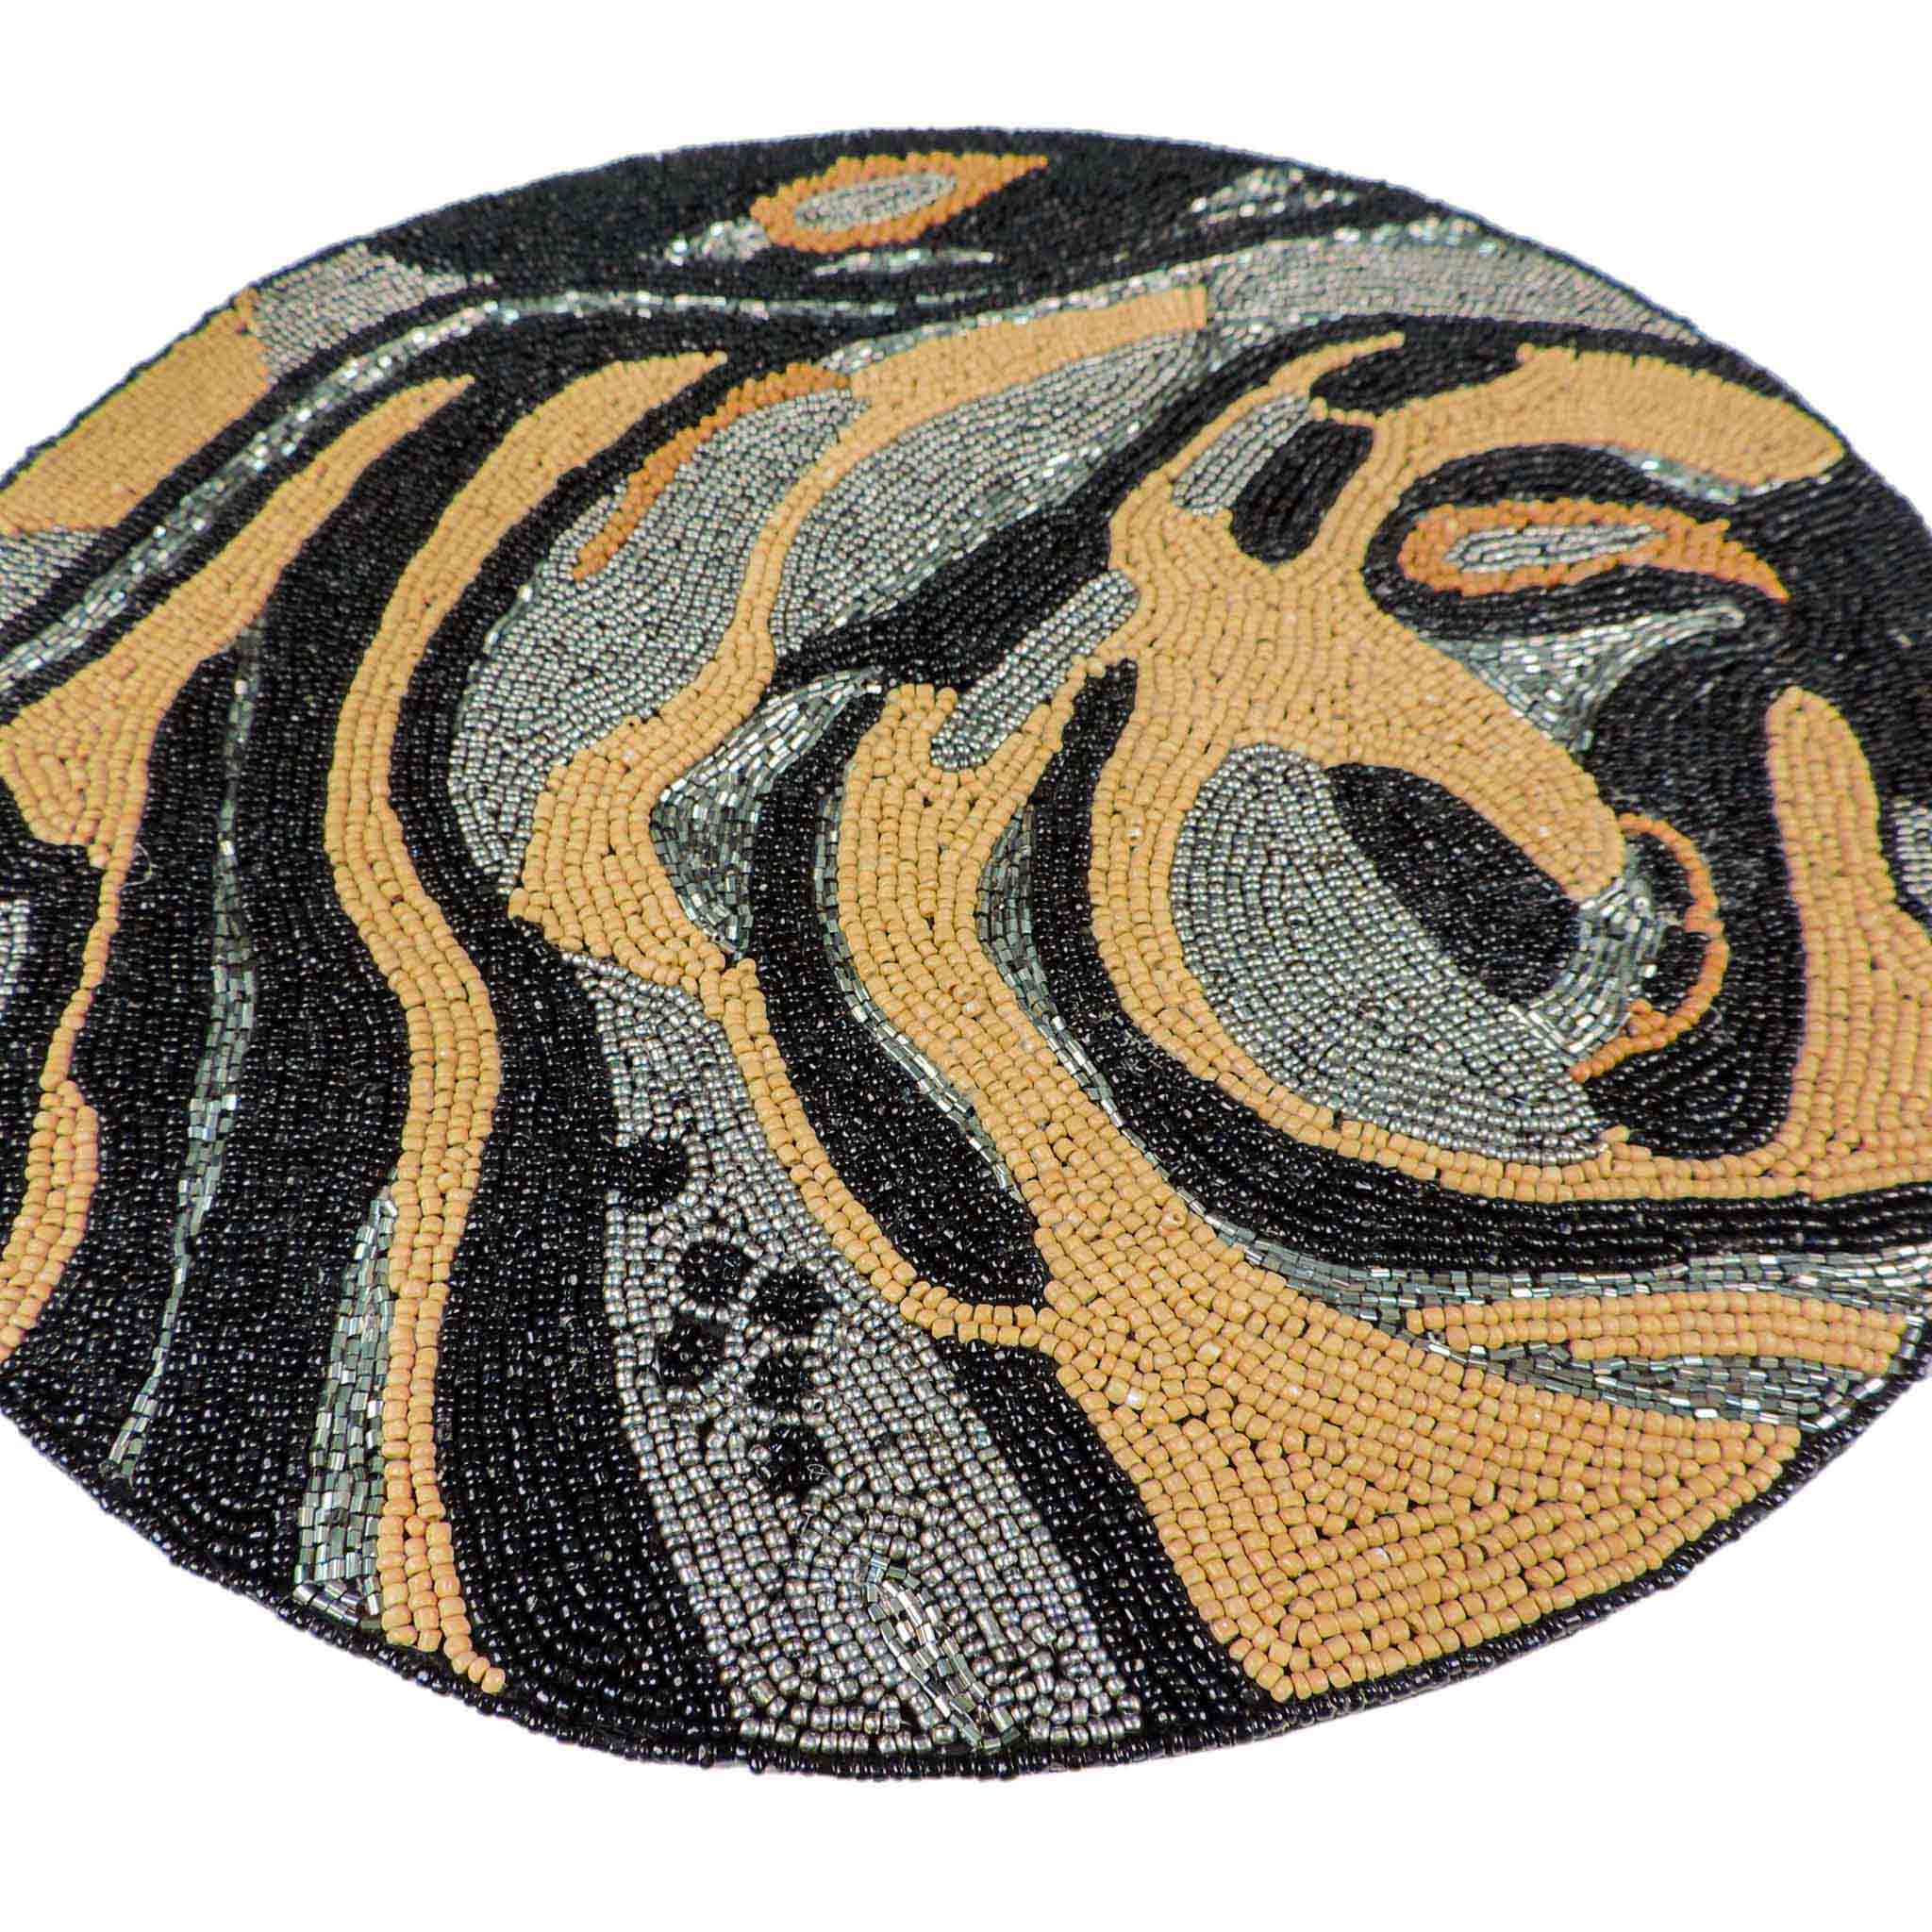 Modern Camo Glass Bead Embroidered Placemat in Natural & Black, Set of 2/4